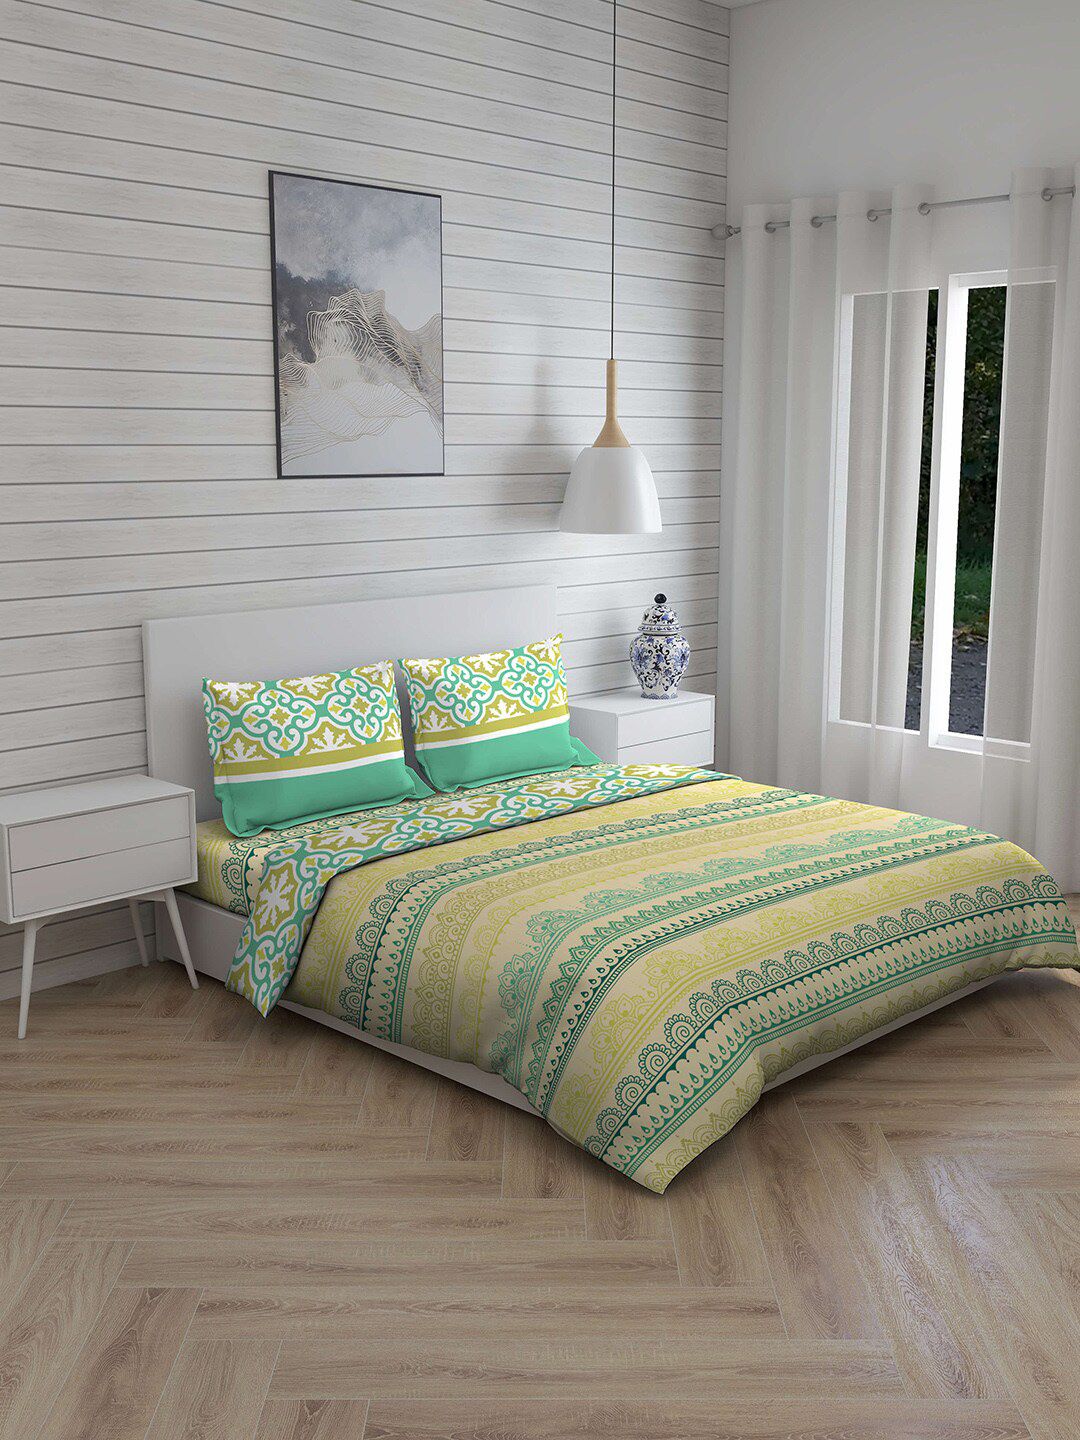 Rajasthan Decor Green & Yellow Ethnic Printed 144 TC Double King 100% Cotton Bedding Set Price in India